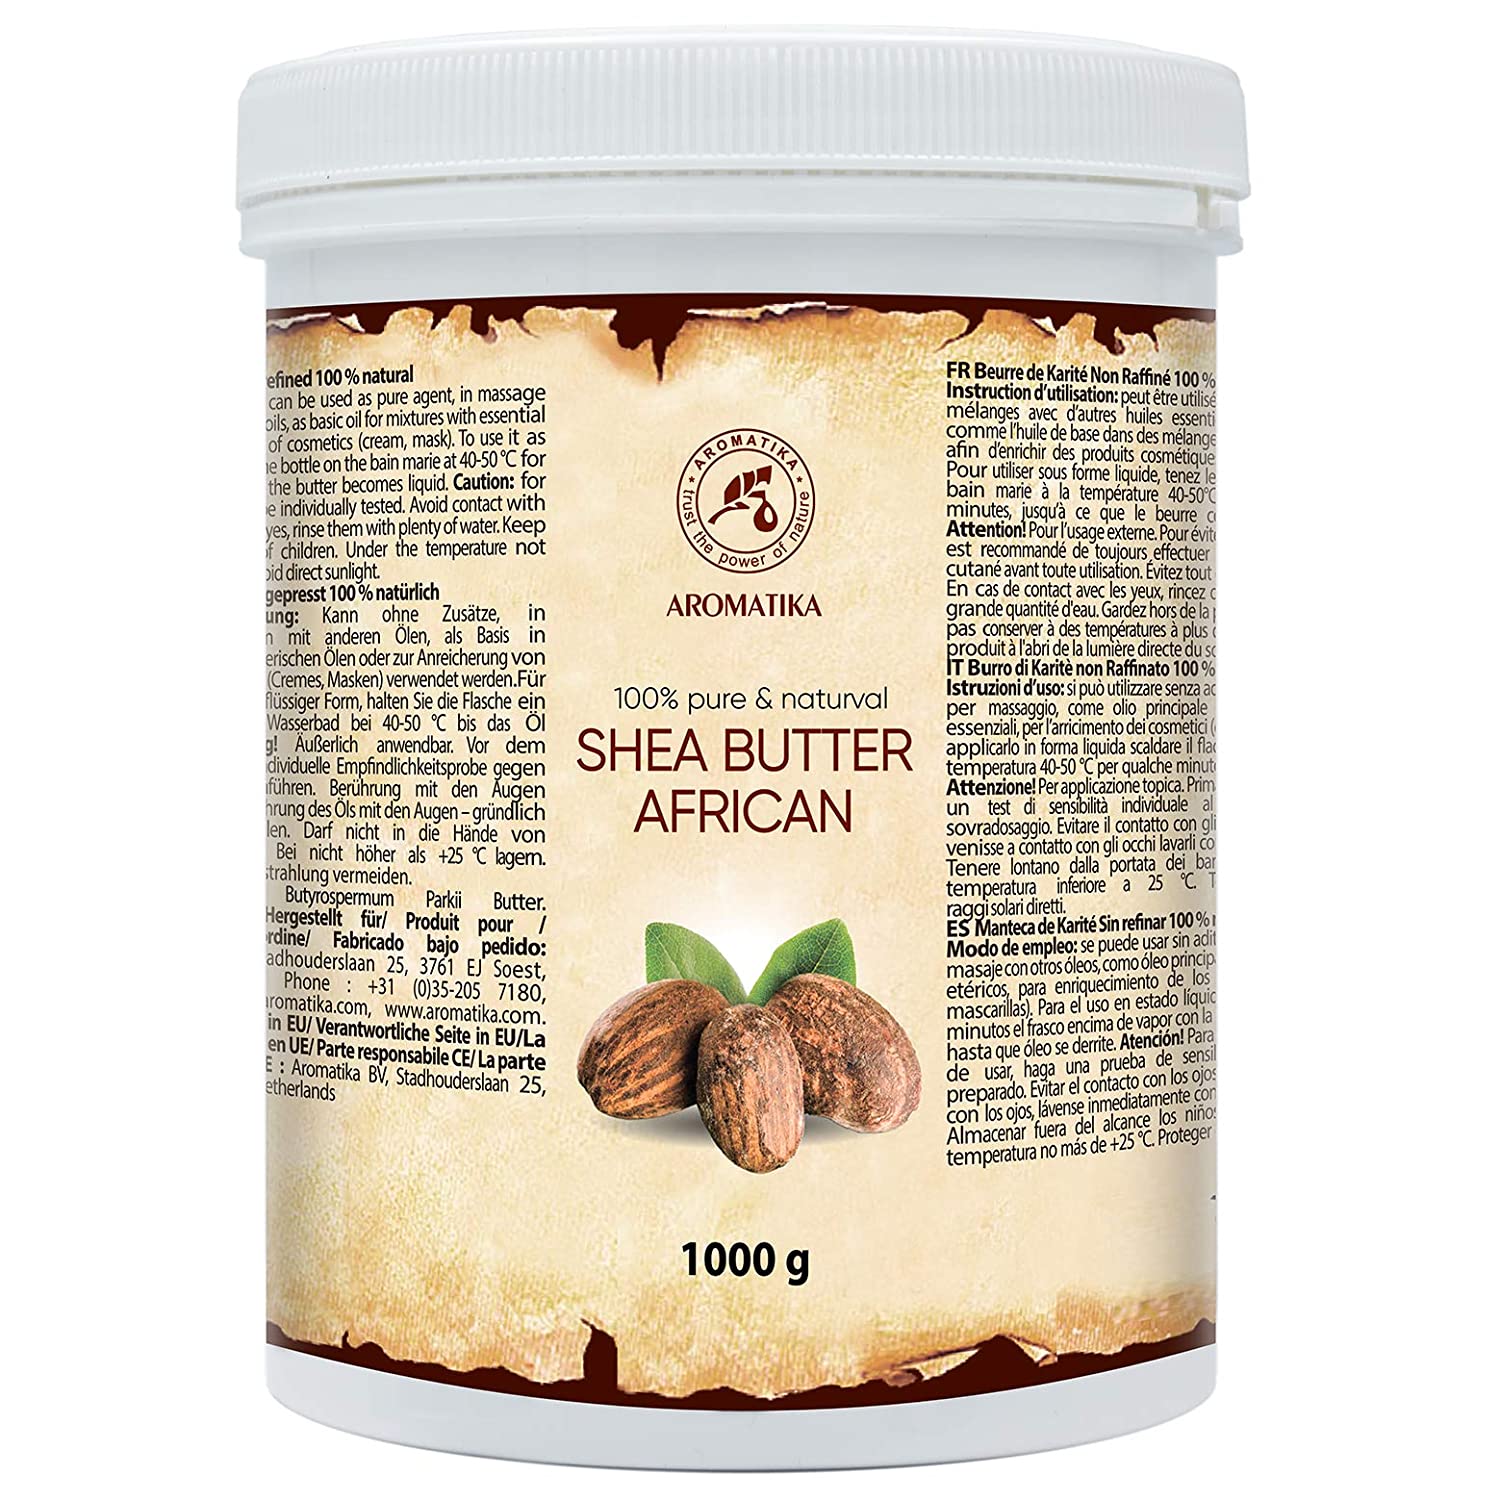  AROMATIKA Shea Butter Cold Pressed 7oz - Unrefined African Shea  Butter - Ghana - 100% Pure & Natural - Best for Hair - Skin - Lip - Face -  Body